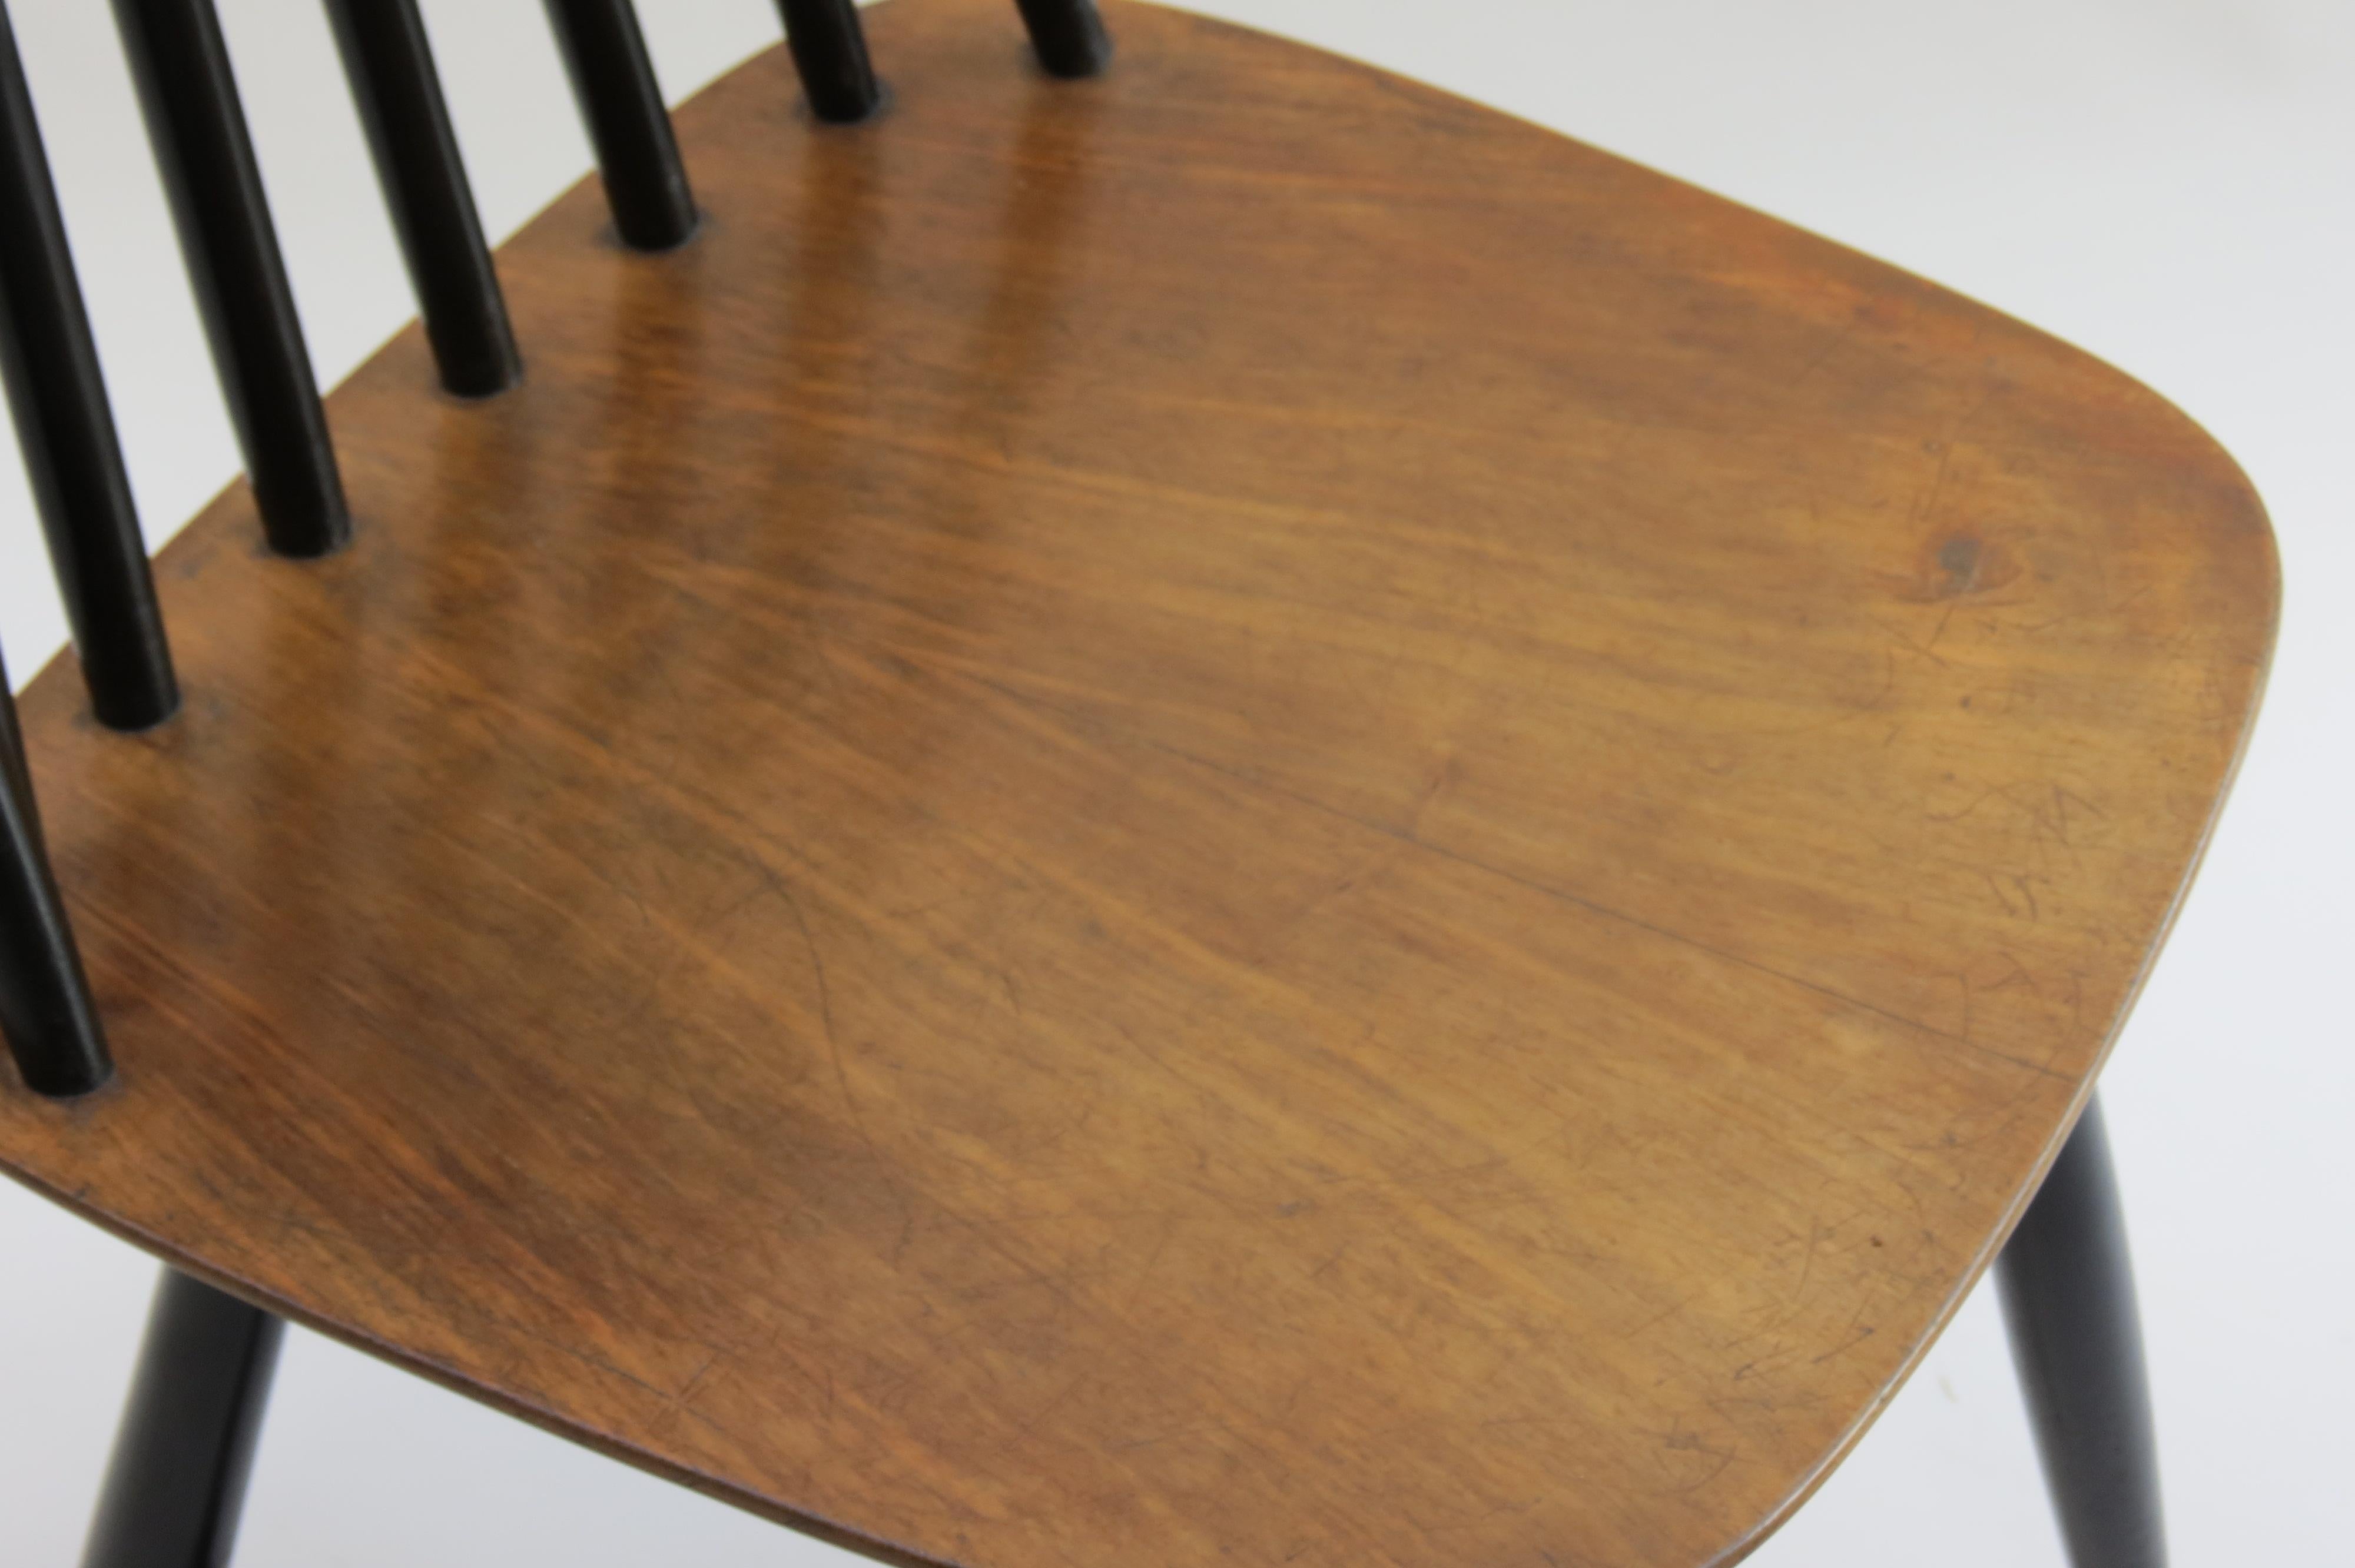 The 1950s Black and Walnut Dining Chair in the Style of Imari Tapiovaara (Maschinell gefertigt)